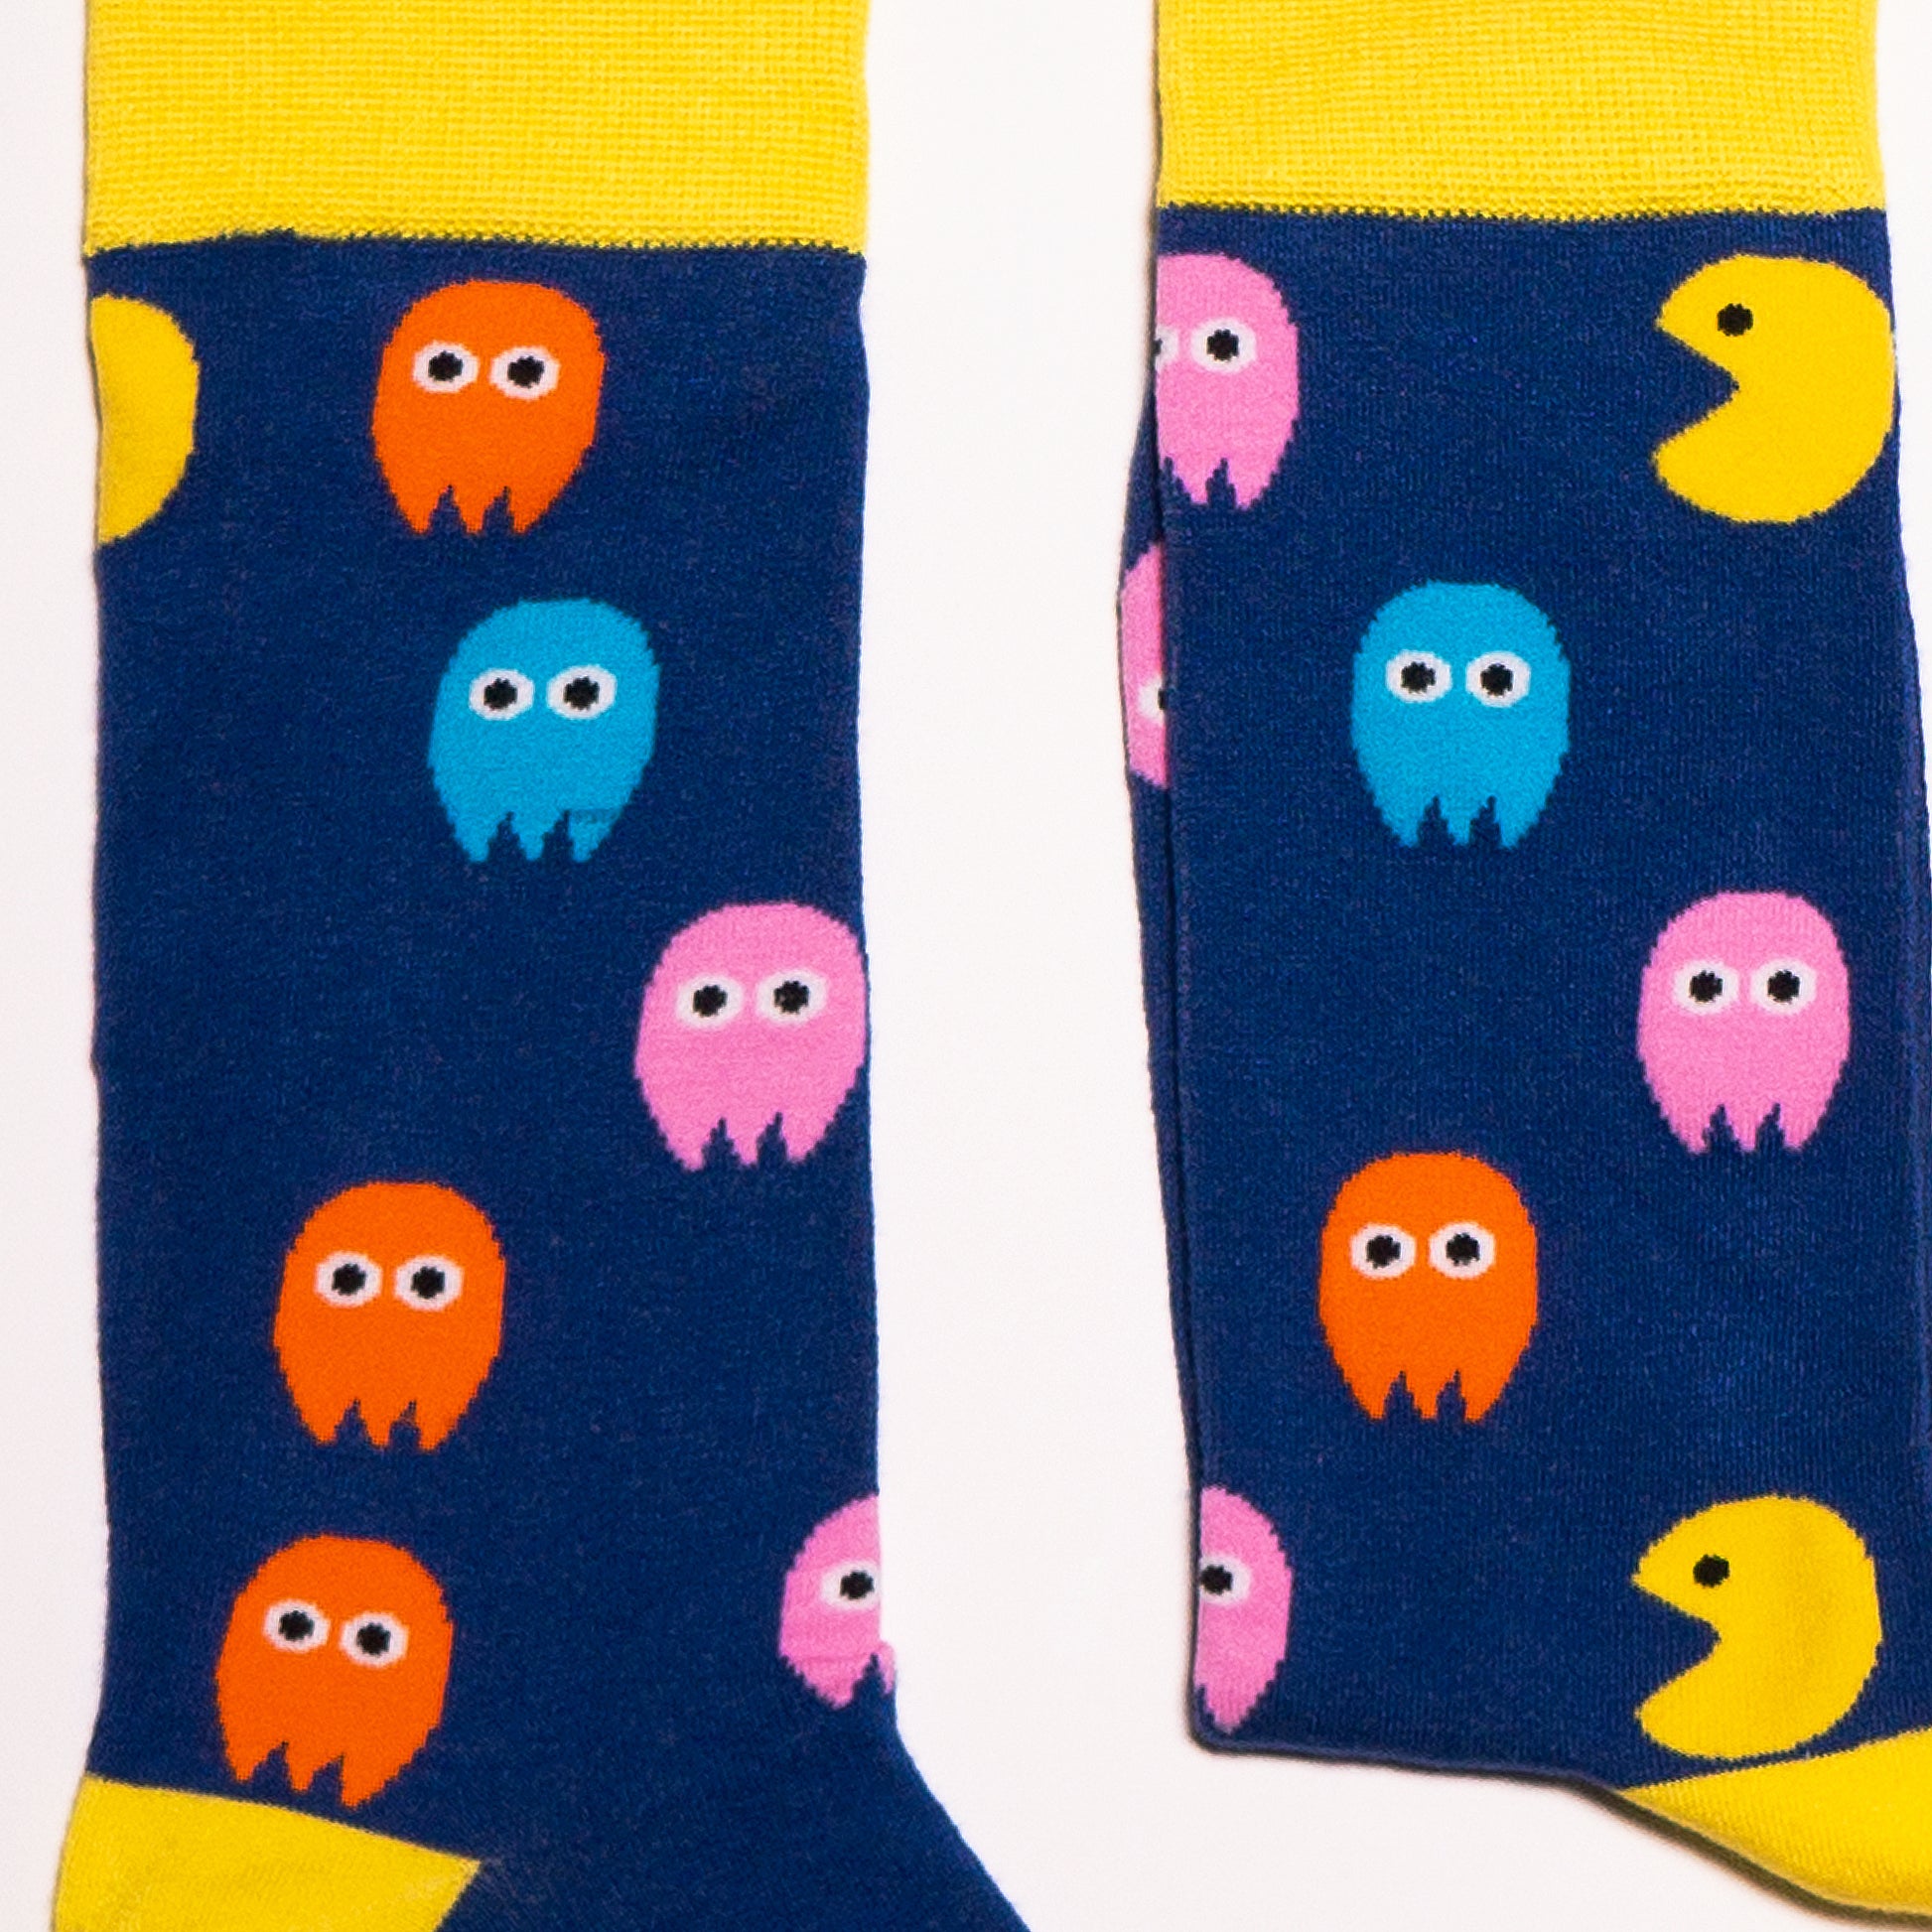 Who doesn't love the nostalgia of the 1980s retro, arcade games. What was your PacMan high score? Fun, comfortable socks that are a bold reminder of our misspent youth. An Incredible Socks collaboration with Andy Awesome, a Munich based 90's child who makes art out of the heroes of his childhood (and ours!).  Soft. Strong. Comfortable. Sustainable.  Available in US Men’s 4-8 and 8-12. Incredible Socks. Pac Man